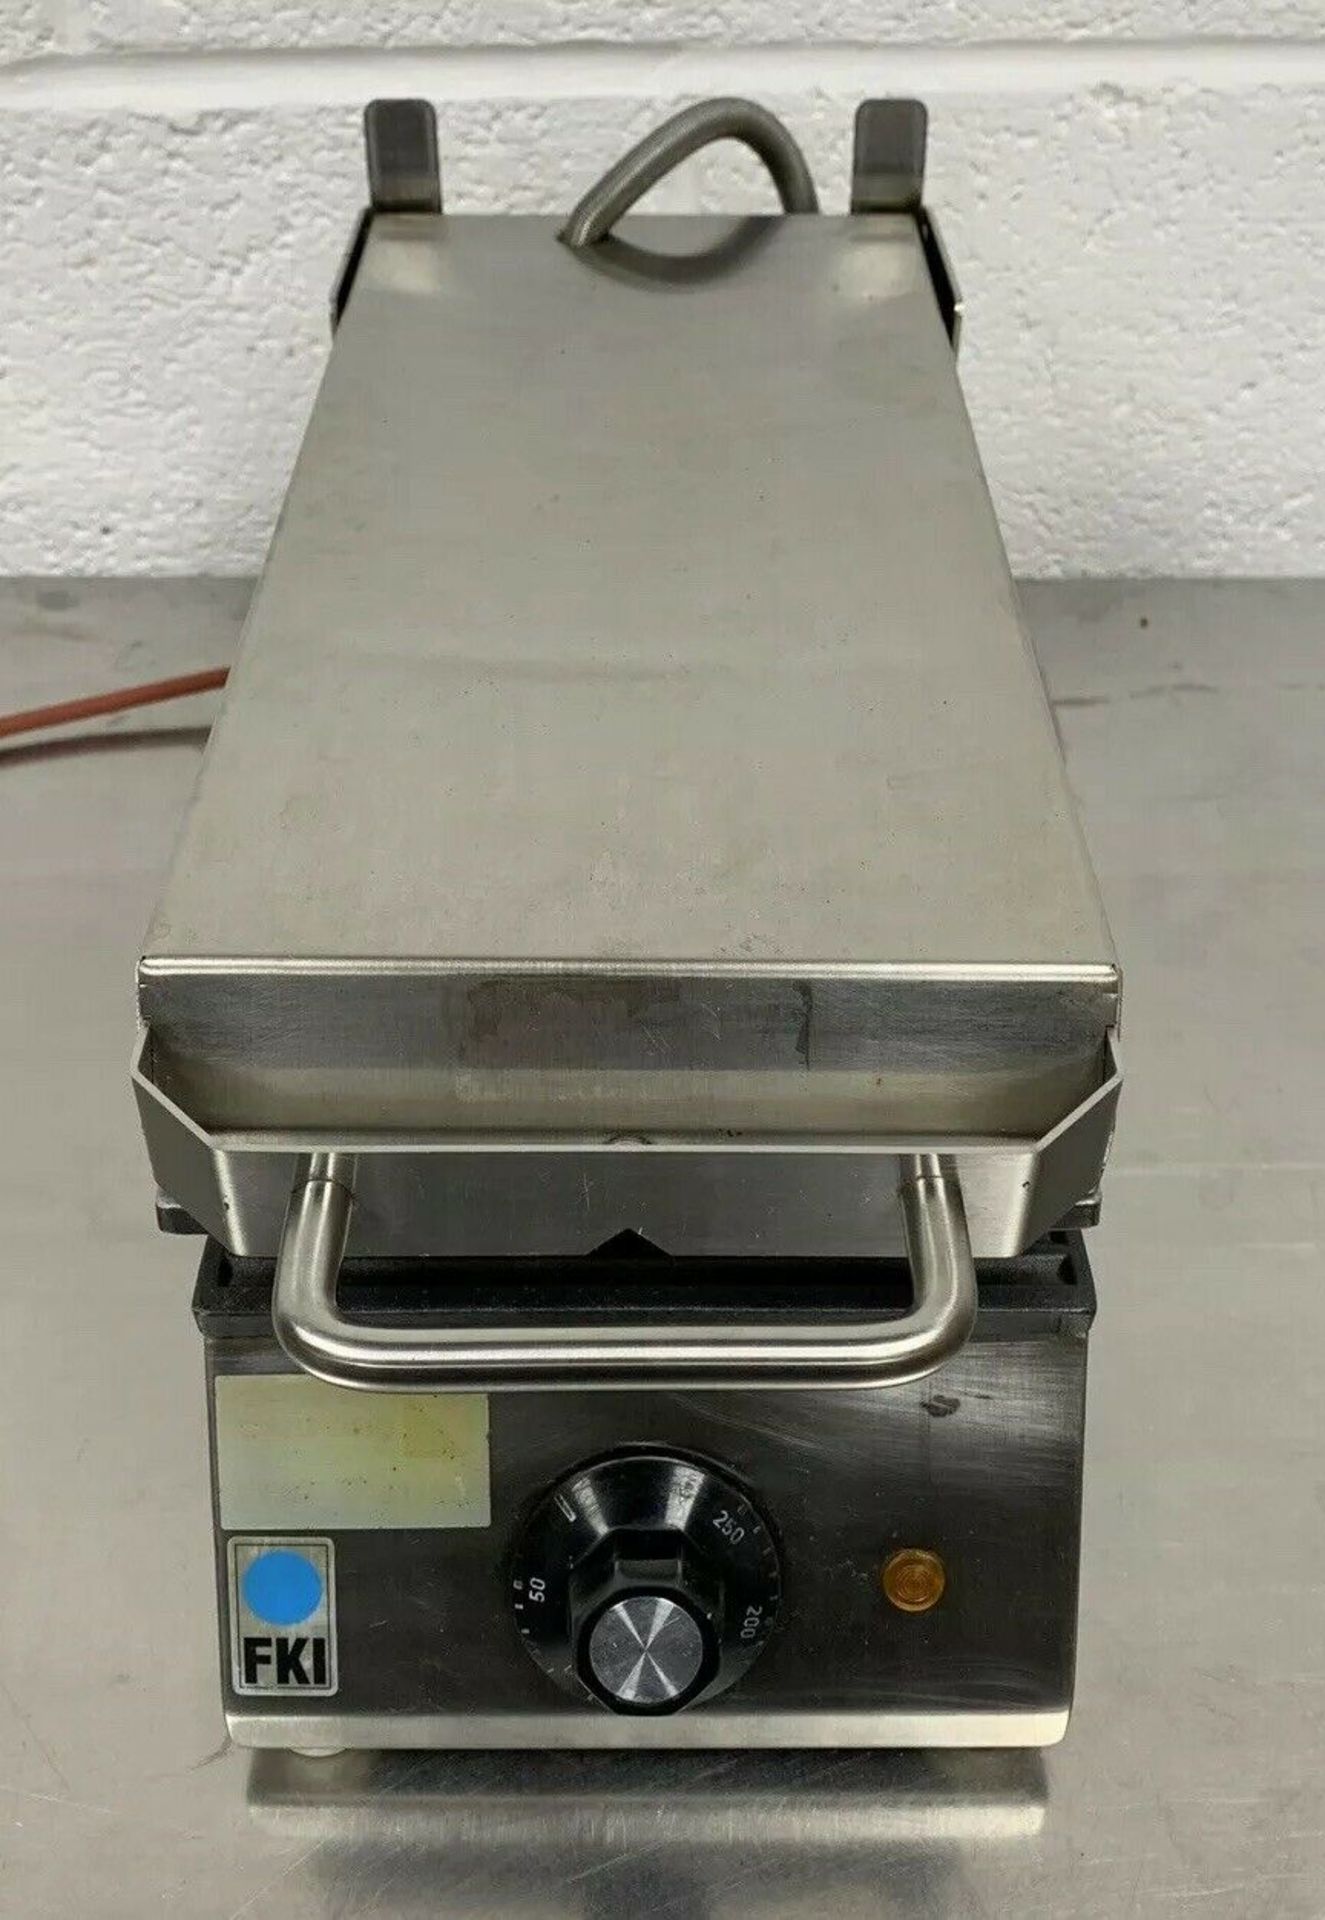 FKI TM05 Double Contact Paninin Grill - Image 2 of 4